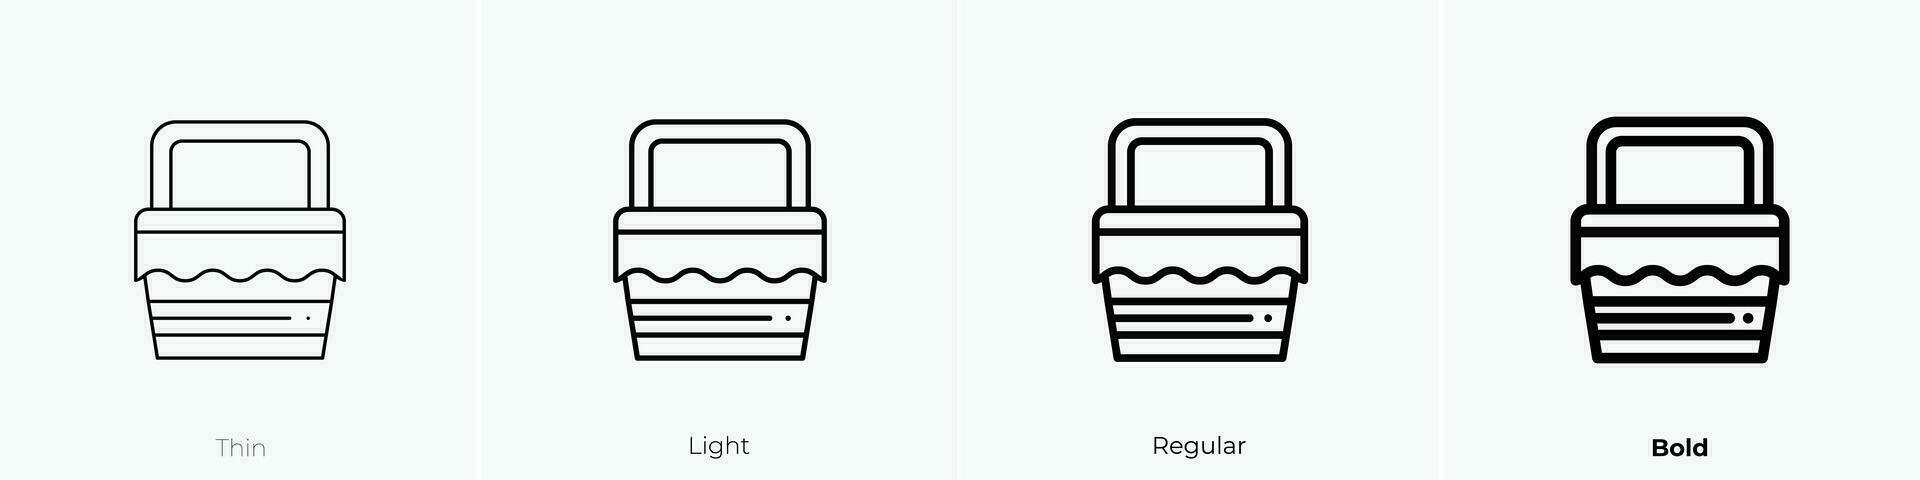 picnic icon. Thin, Light, Regular And Bold style design isolated on white background vector